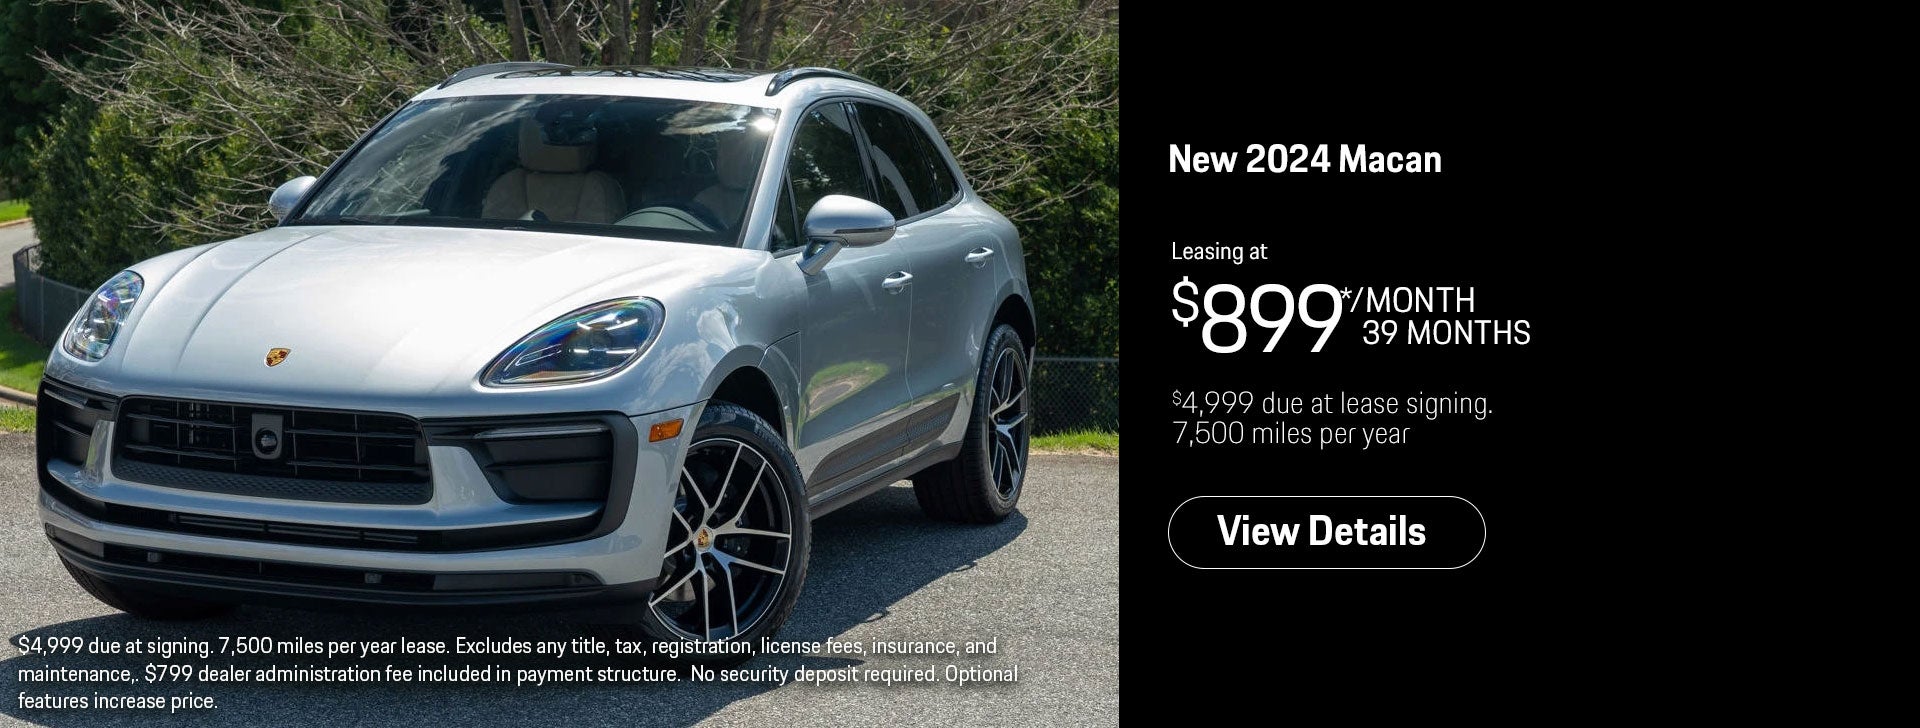 Macan lease